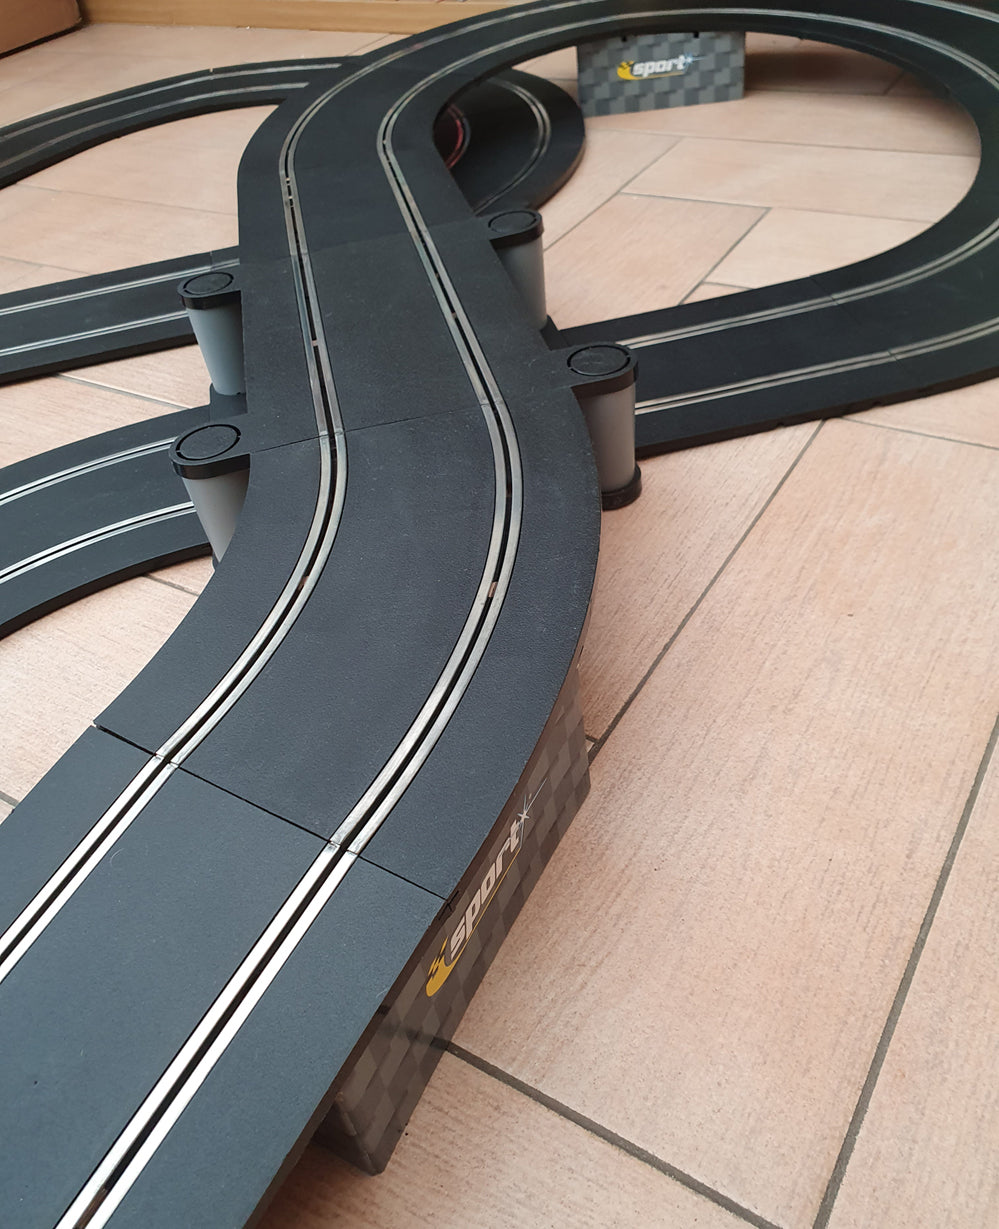 Scalextric Sport 1:32 Track Set Layout With Porsche Cars #AS9